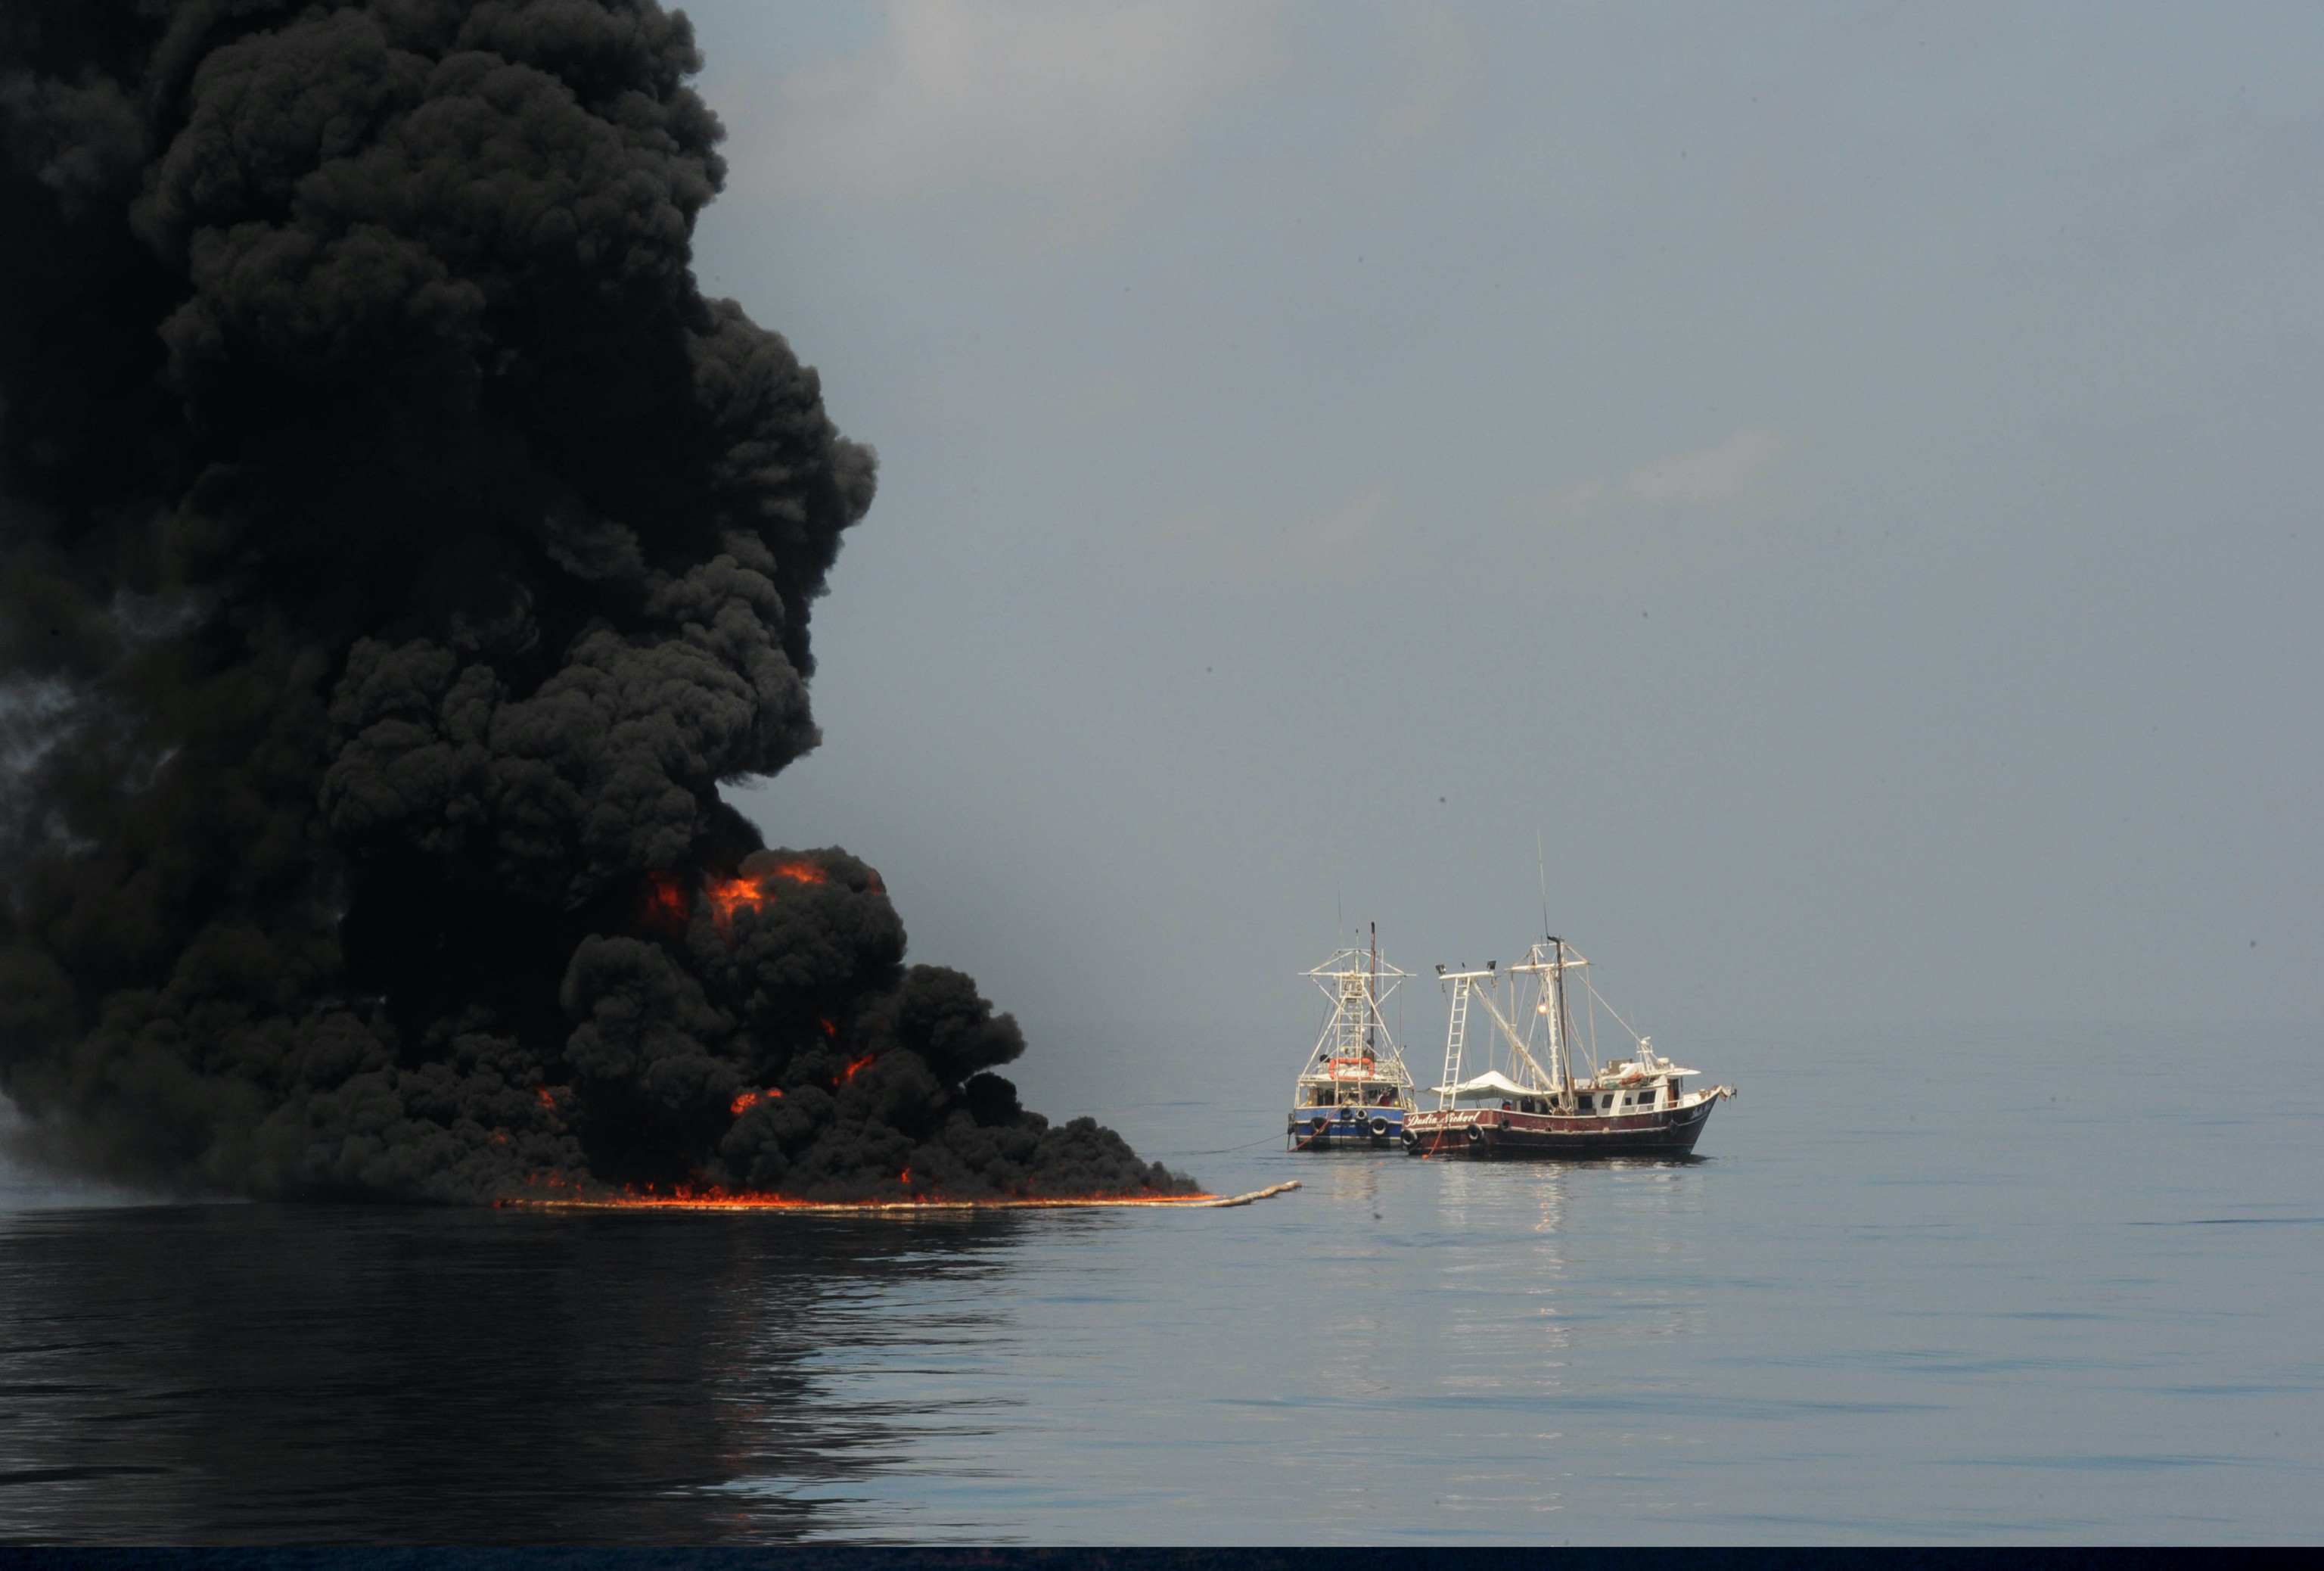 Two coast guard tugboats attempt to burn oil after the Deepwater Horizon oil spill